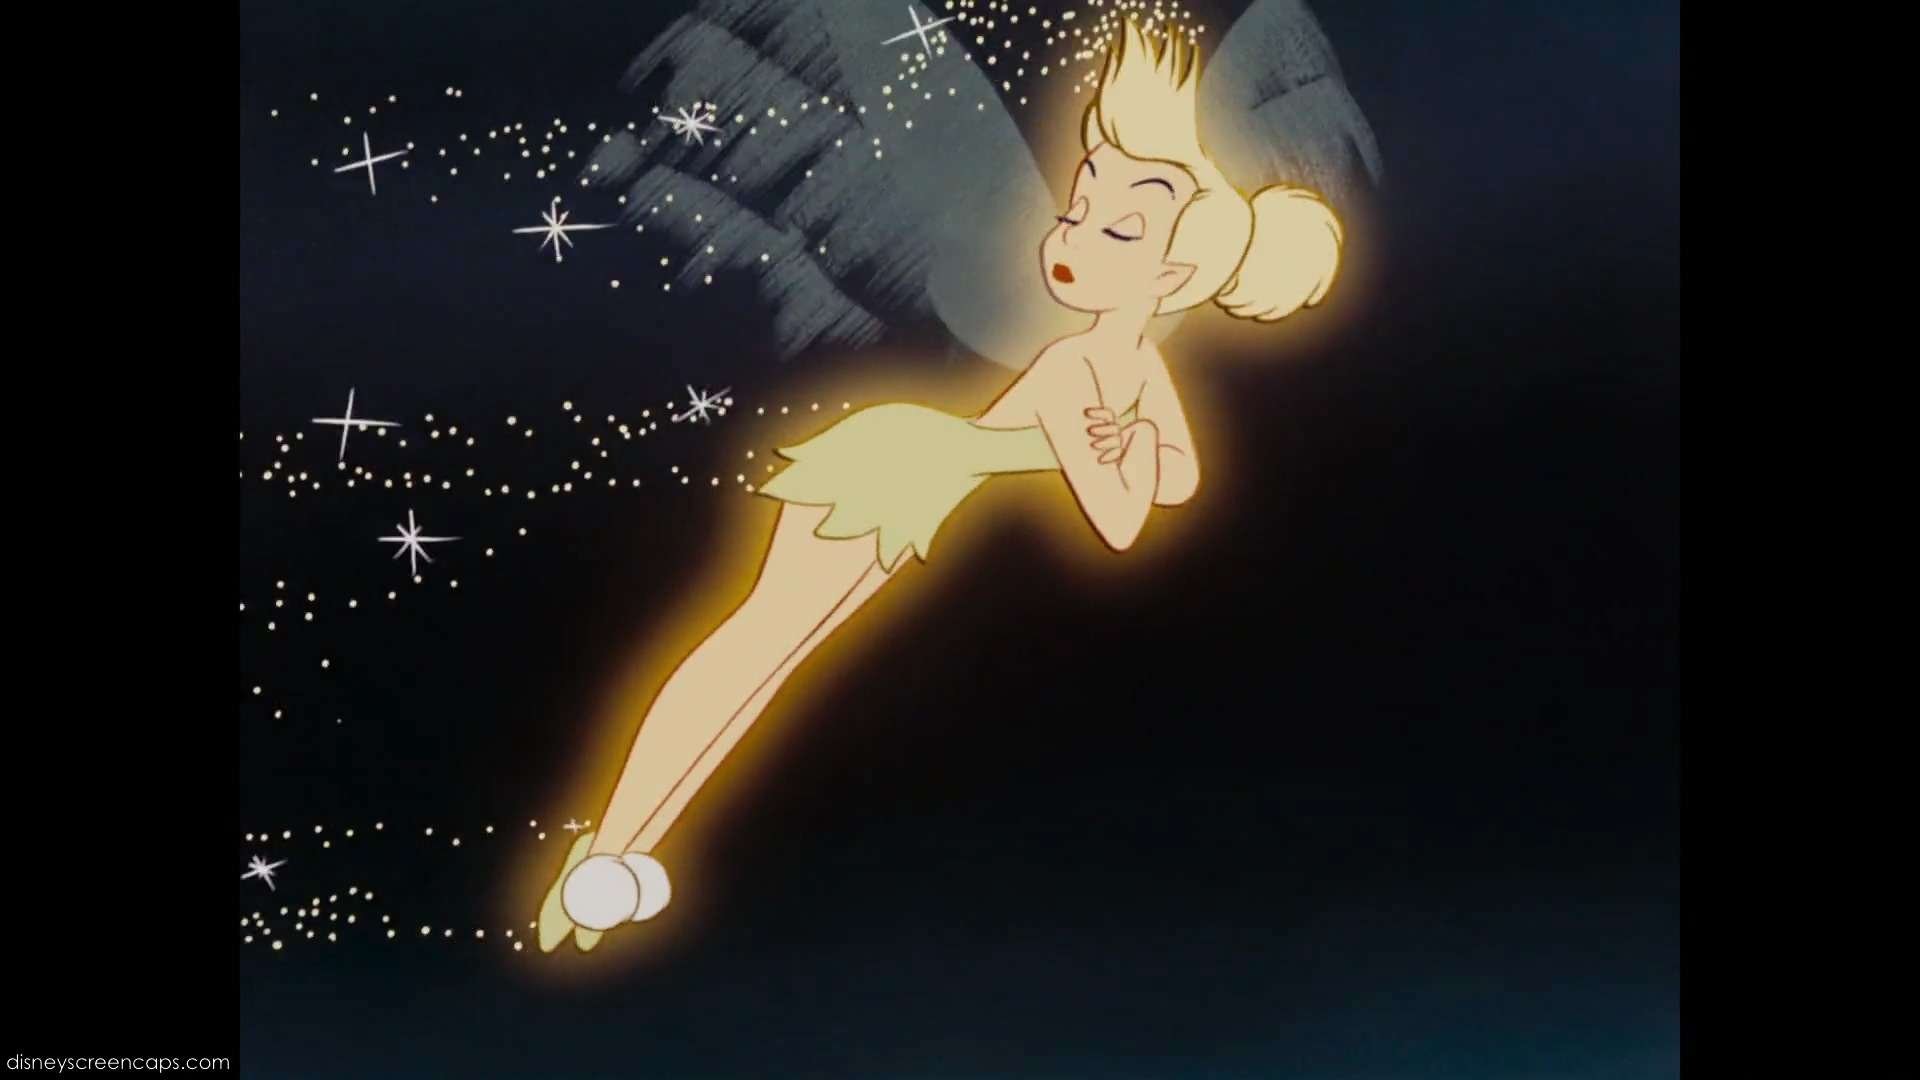 Tinkerbell Pictures Wallpaper.